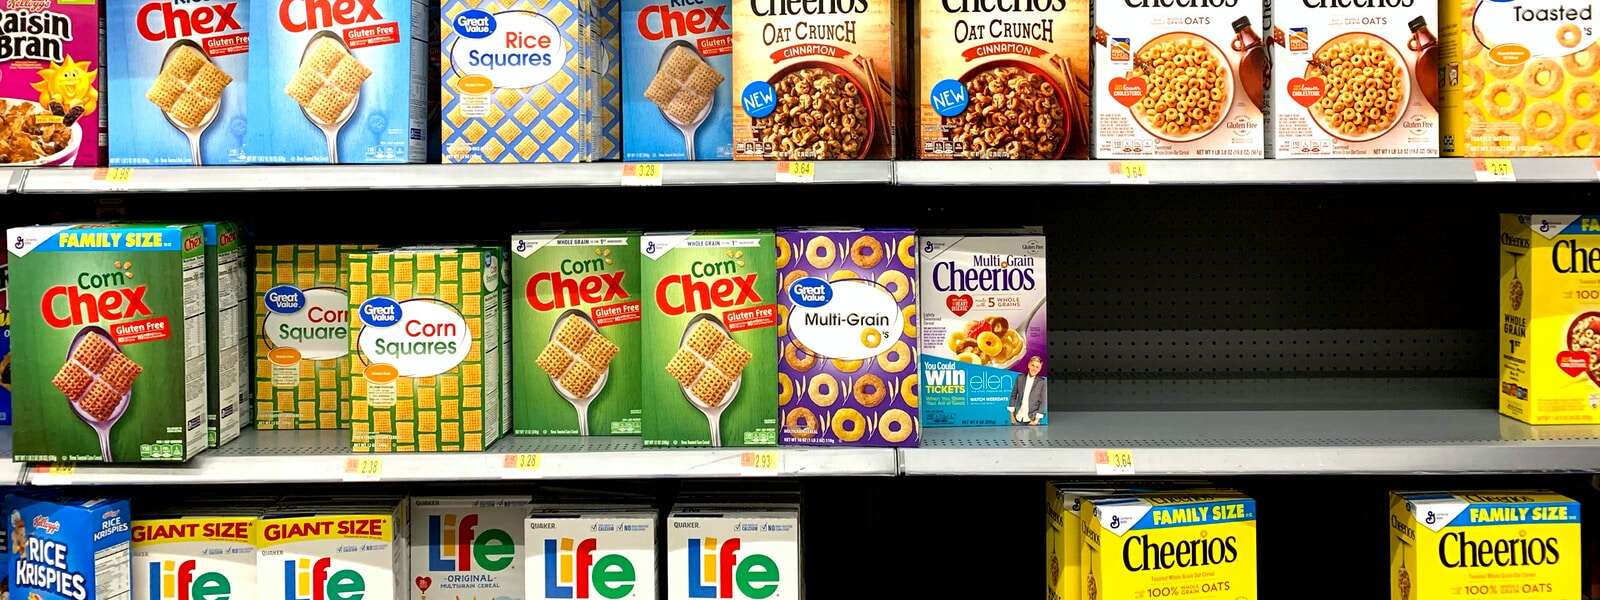 Boxed cereal on shelves at Walmart.